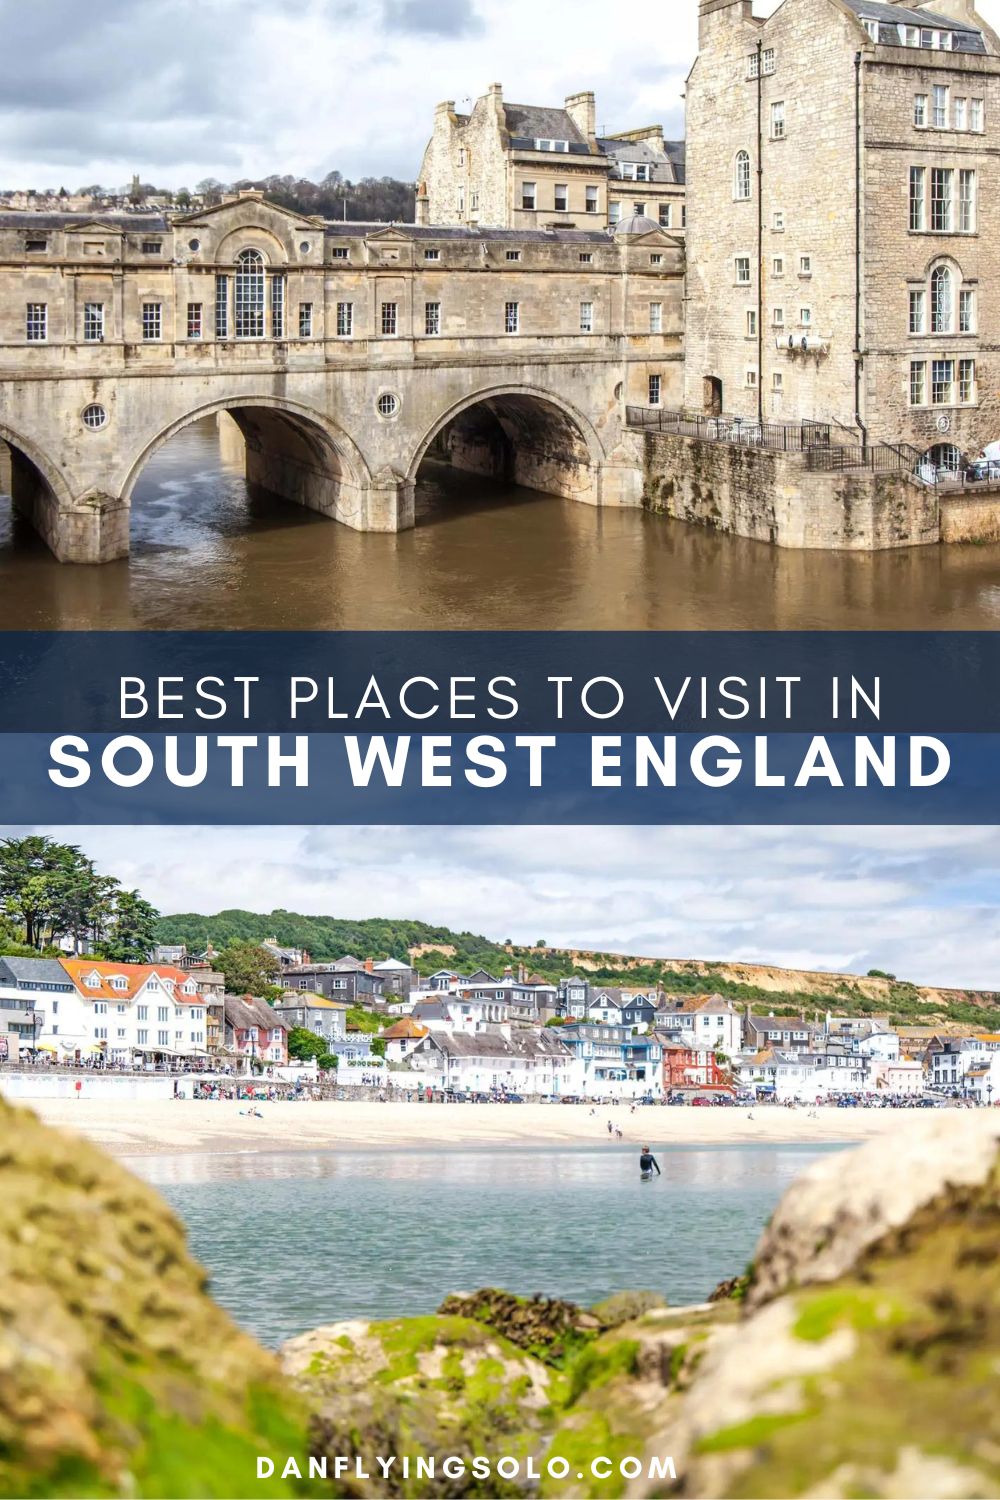 Discover some of the best places to visit in South West England, including unusual spots and special stays for a unique getaway.